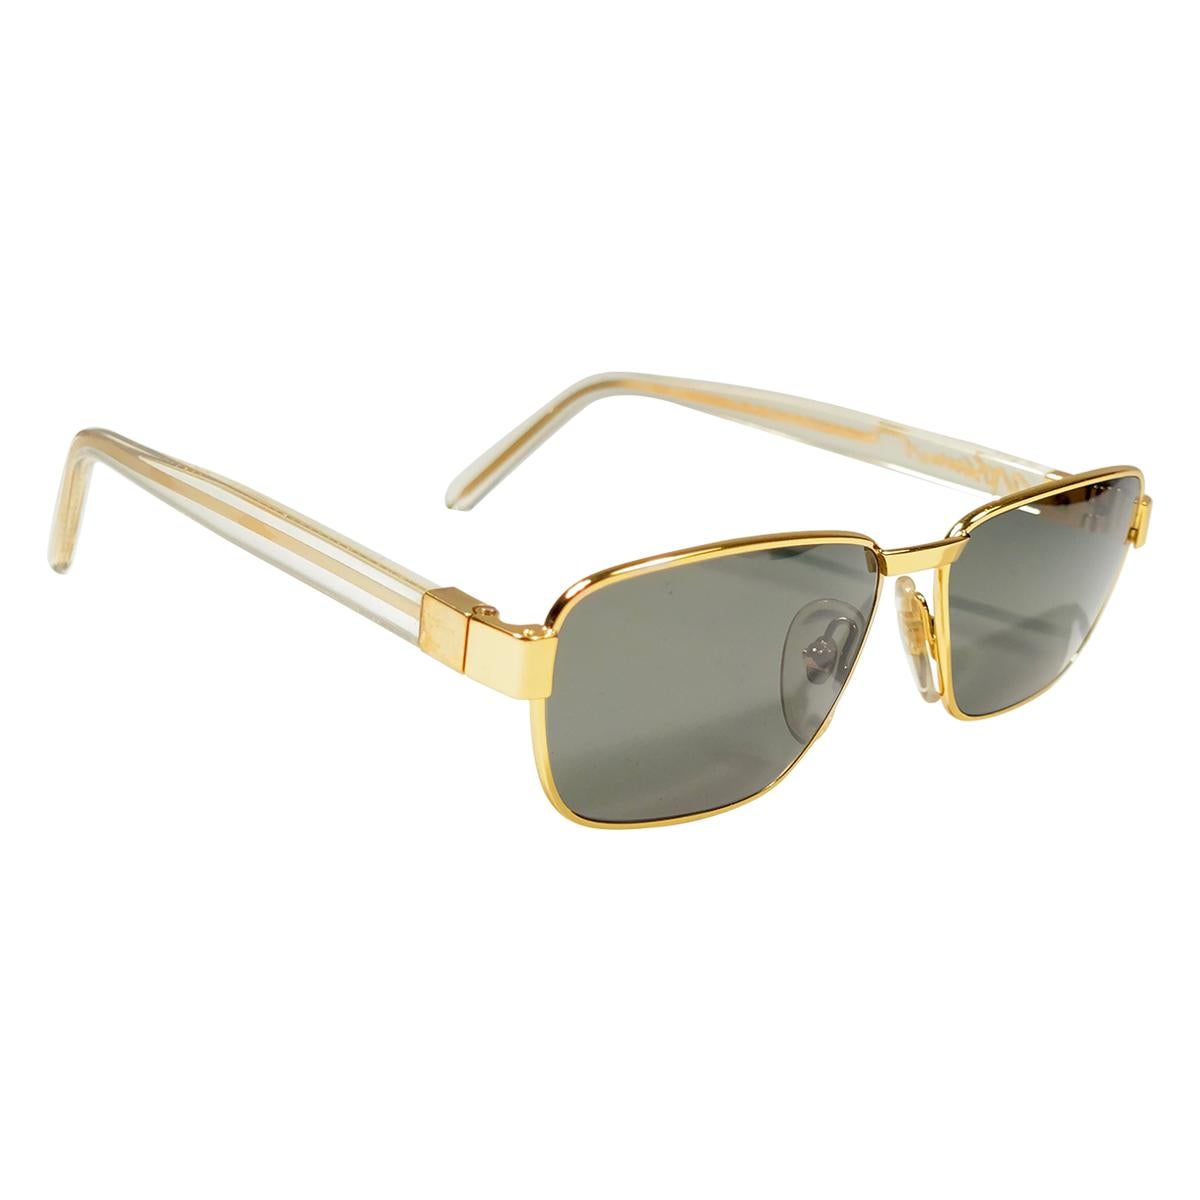 New Vintage Moschino By Persol MM33 Frame Medium Rectangular Gold Sunglasses  For Sale